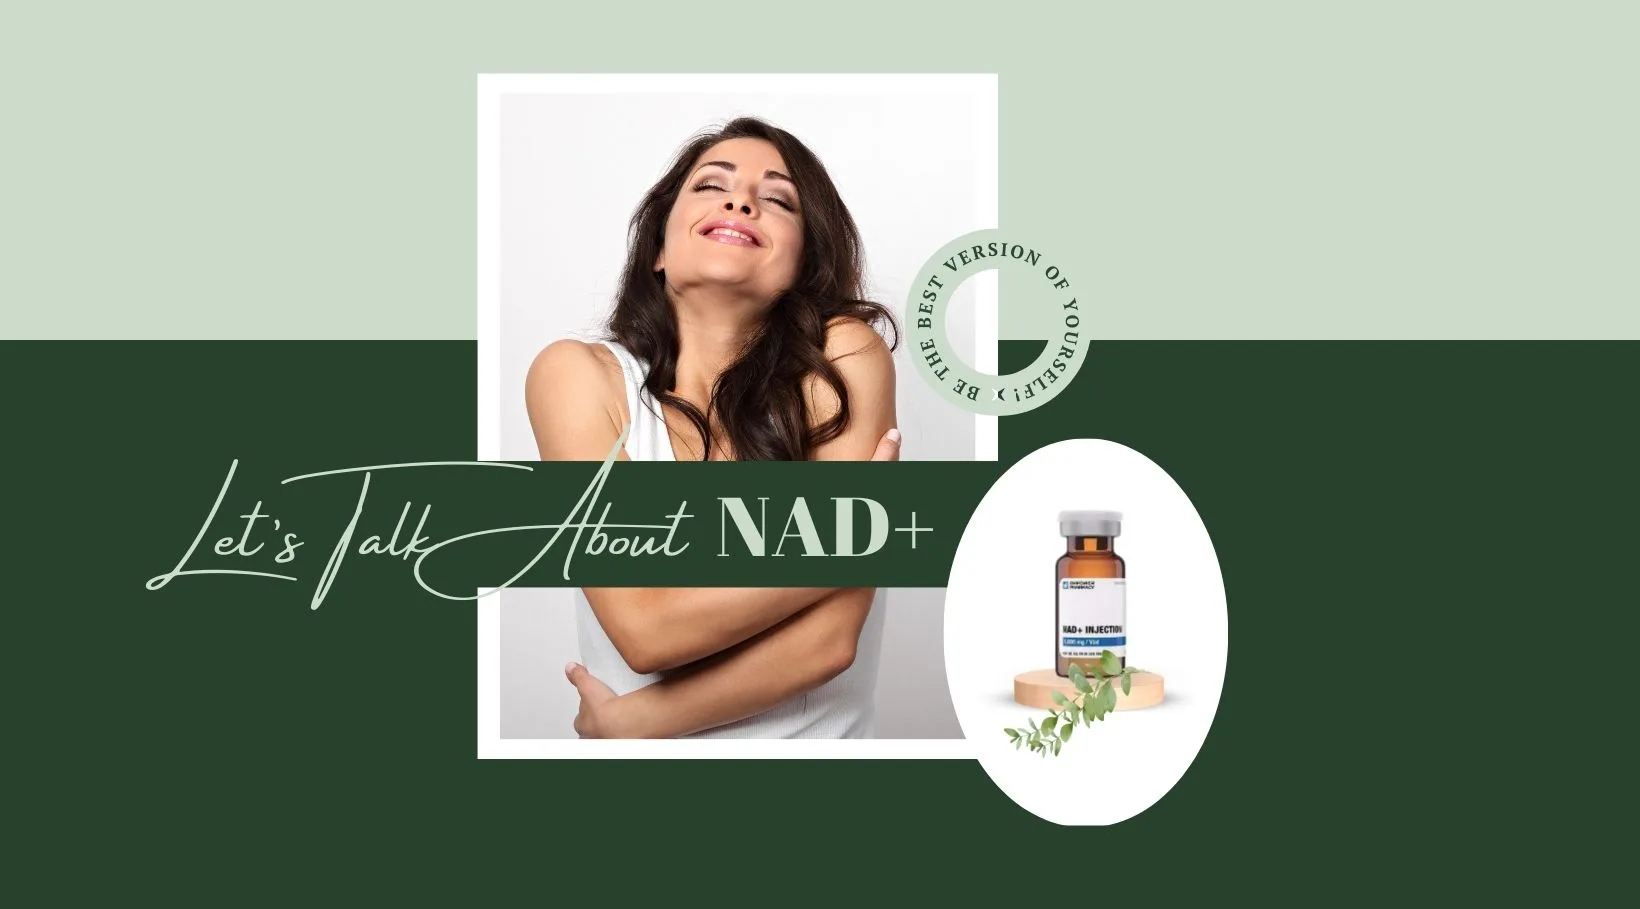 Peptide Therapy and NAD+ at Jolie Visage in Buford